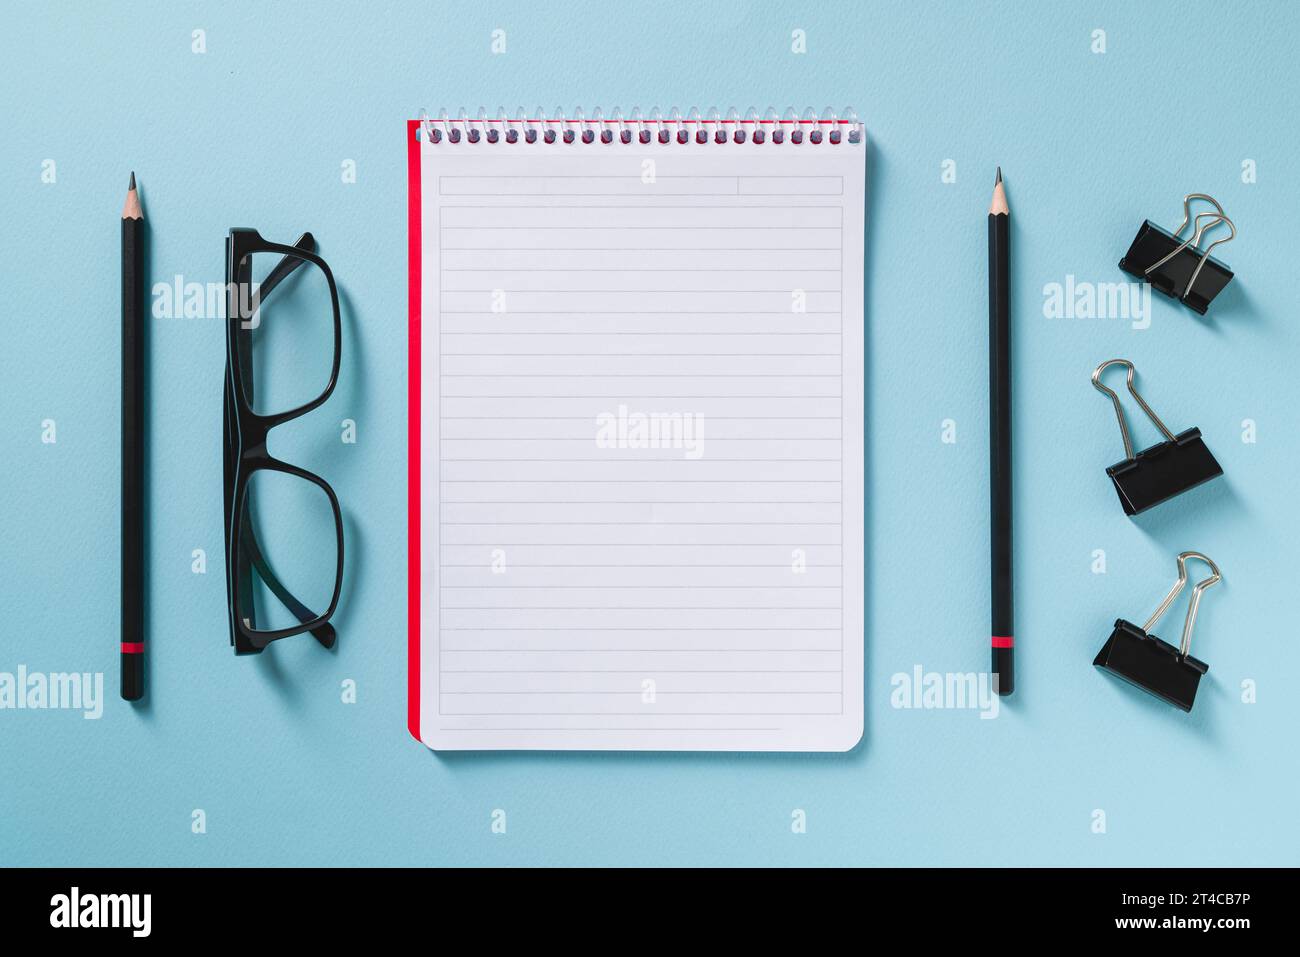 Top view of empty notebook, glasses and pen on blue office desk Stock Photo